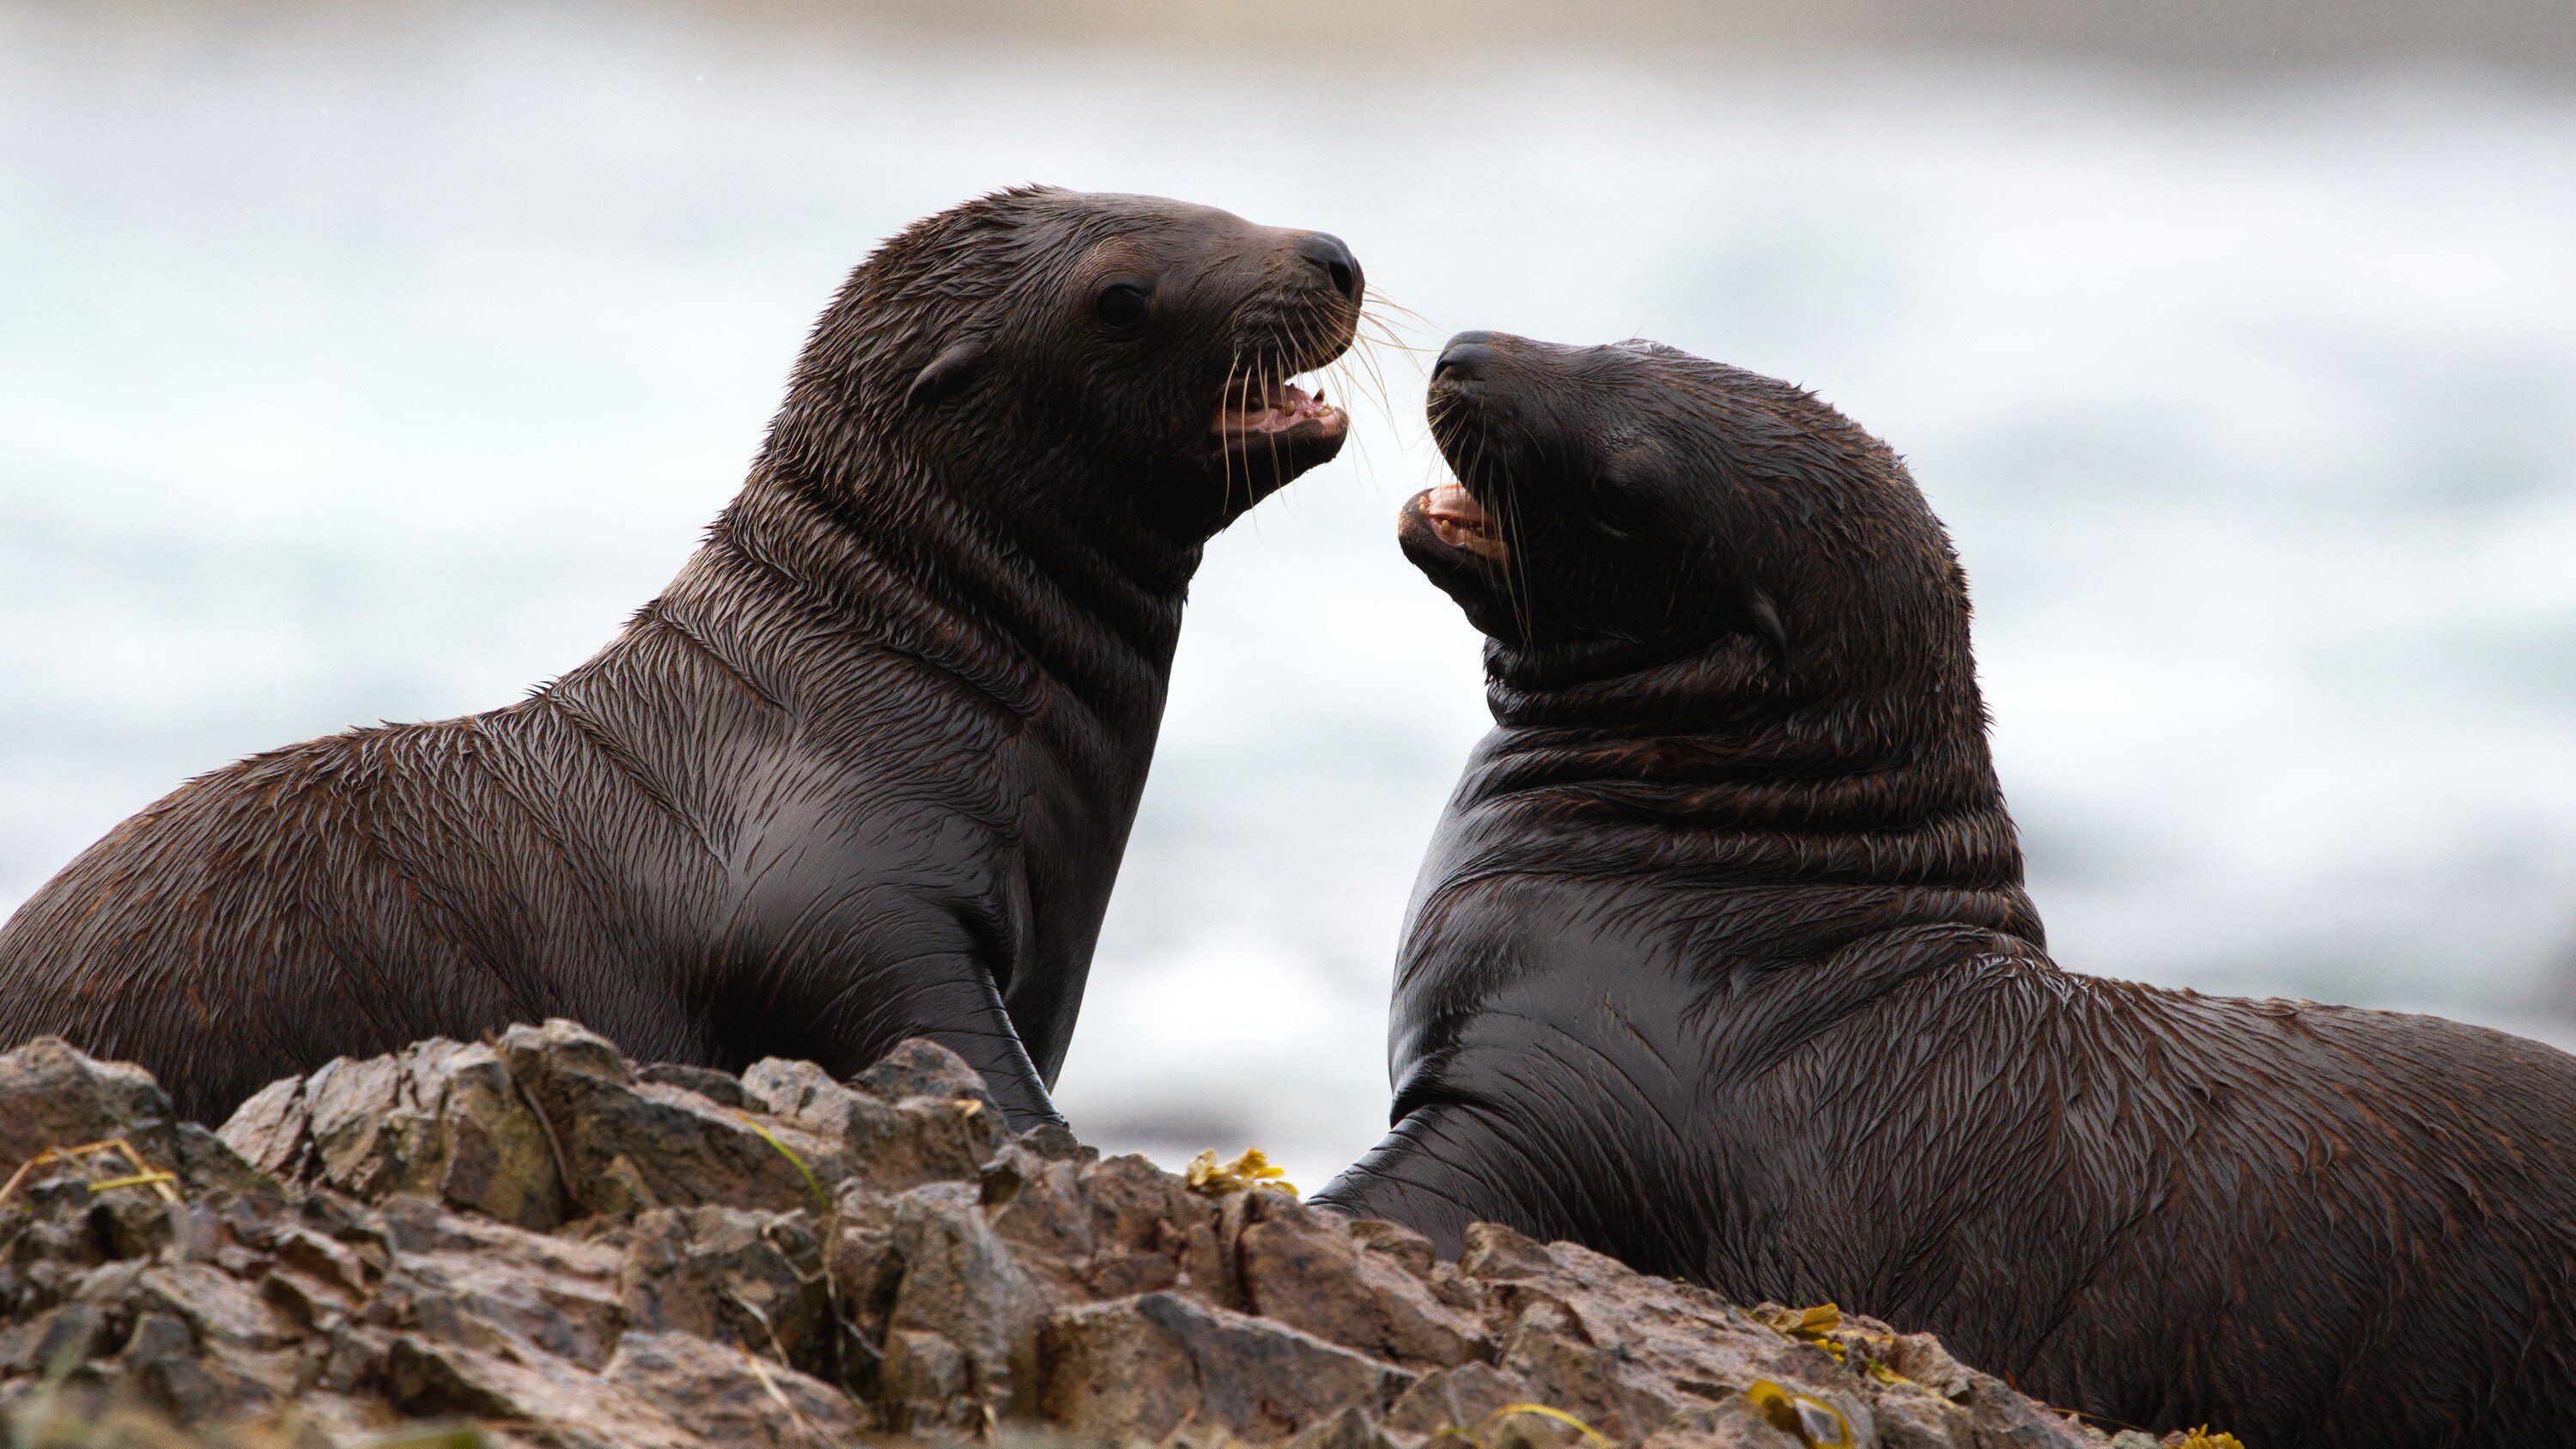 Two sea lion pups interact on the rocks. (National Geographic for Disney+/Ryan Tidman)